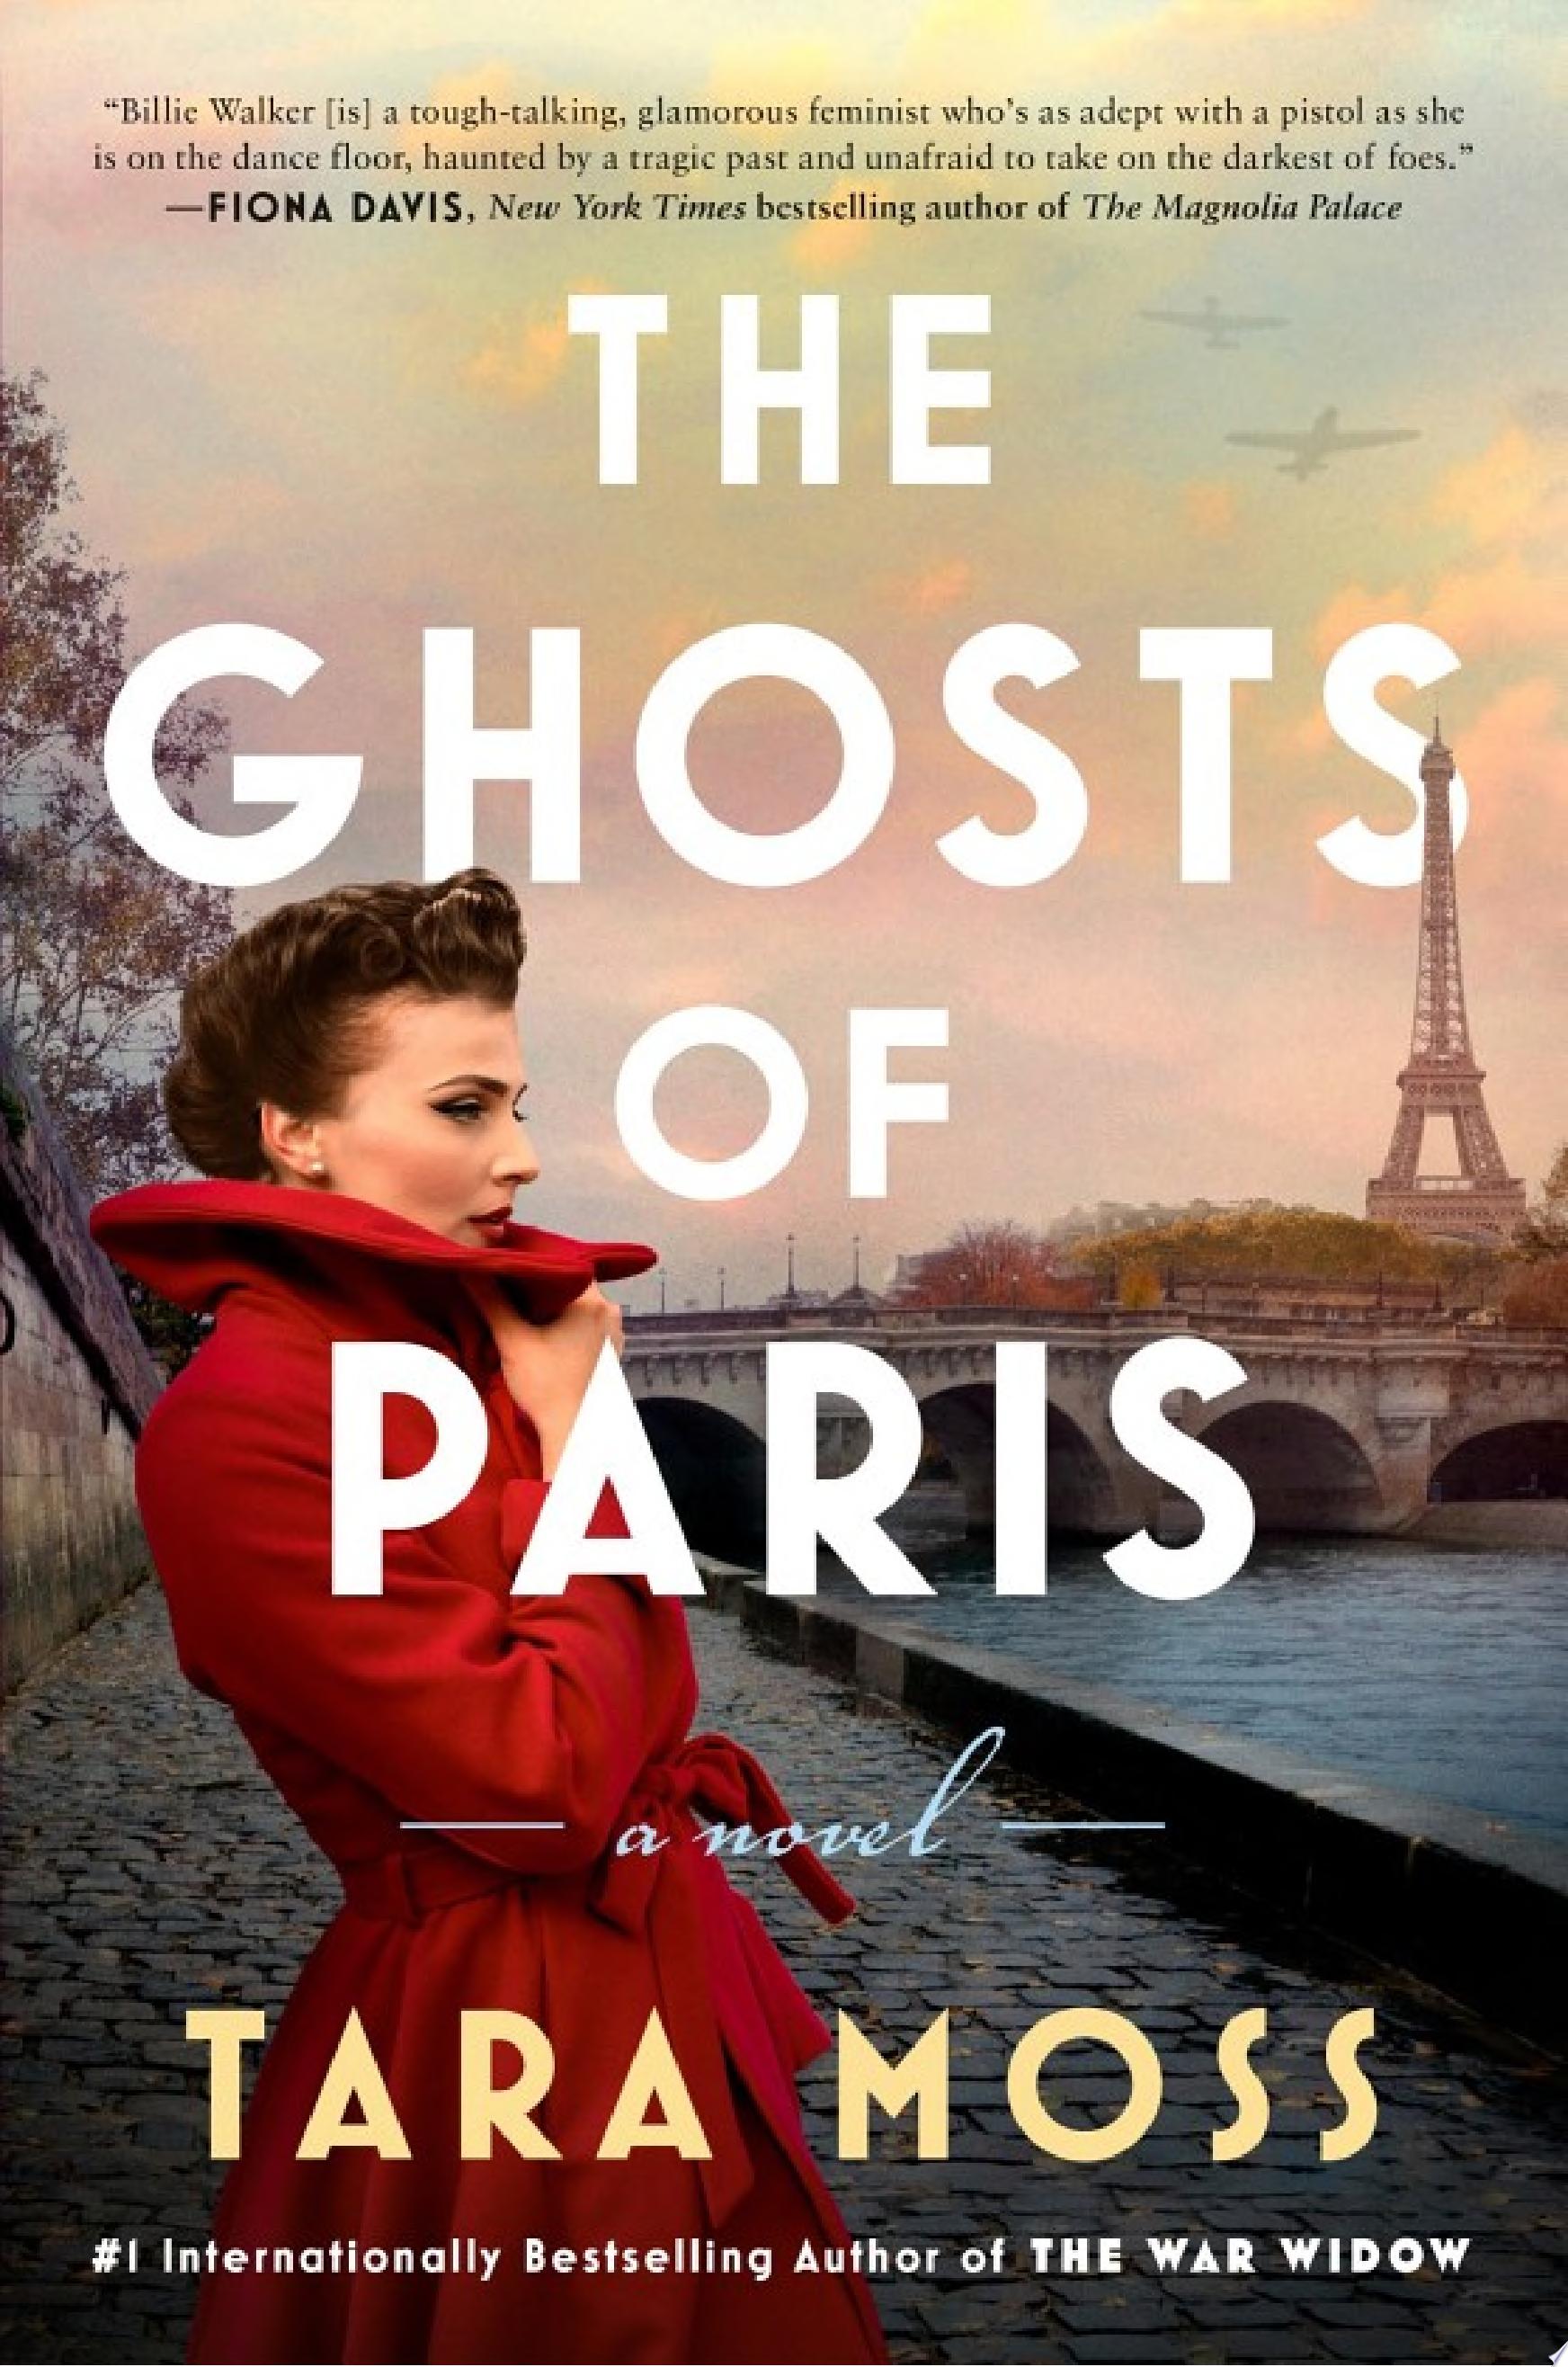 Image for "The Ghosts of Paris"